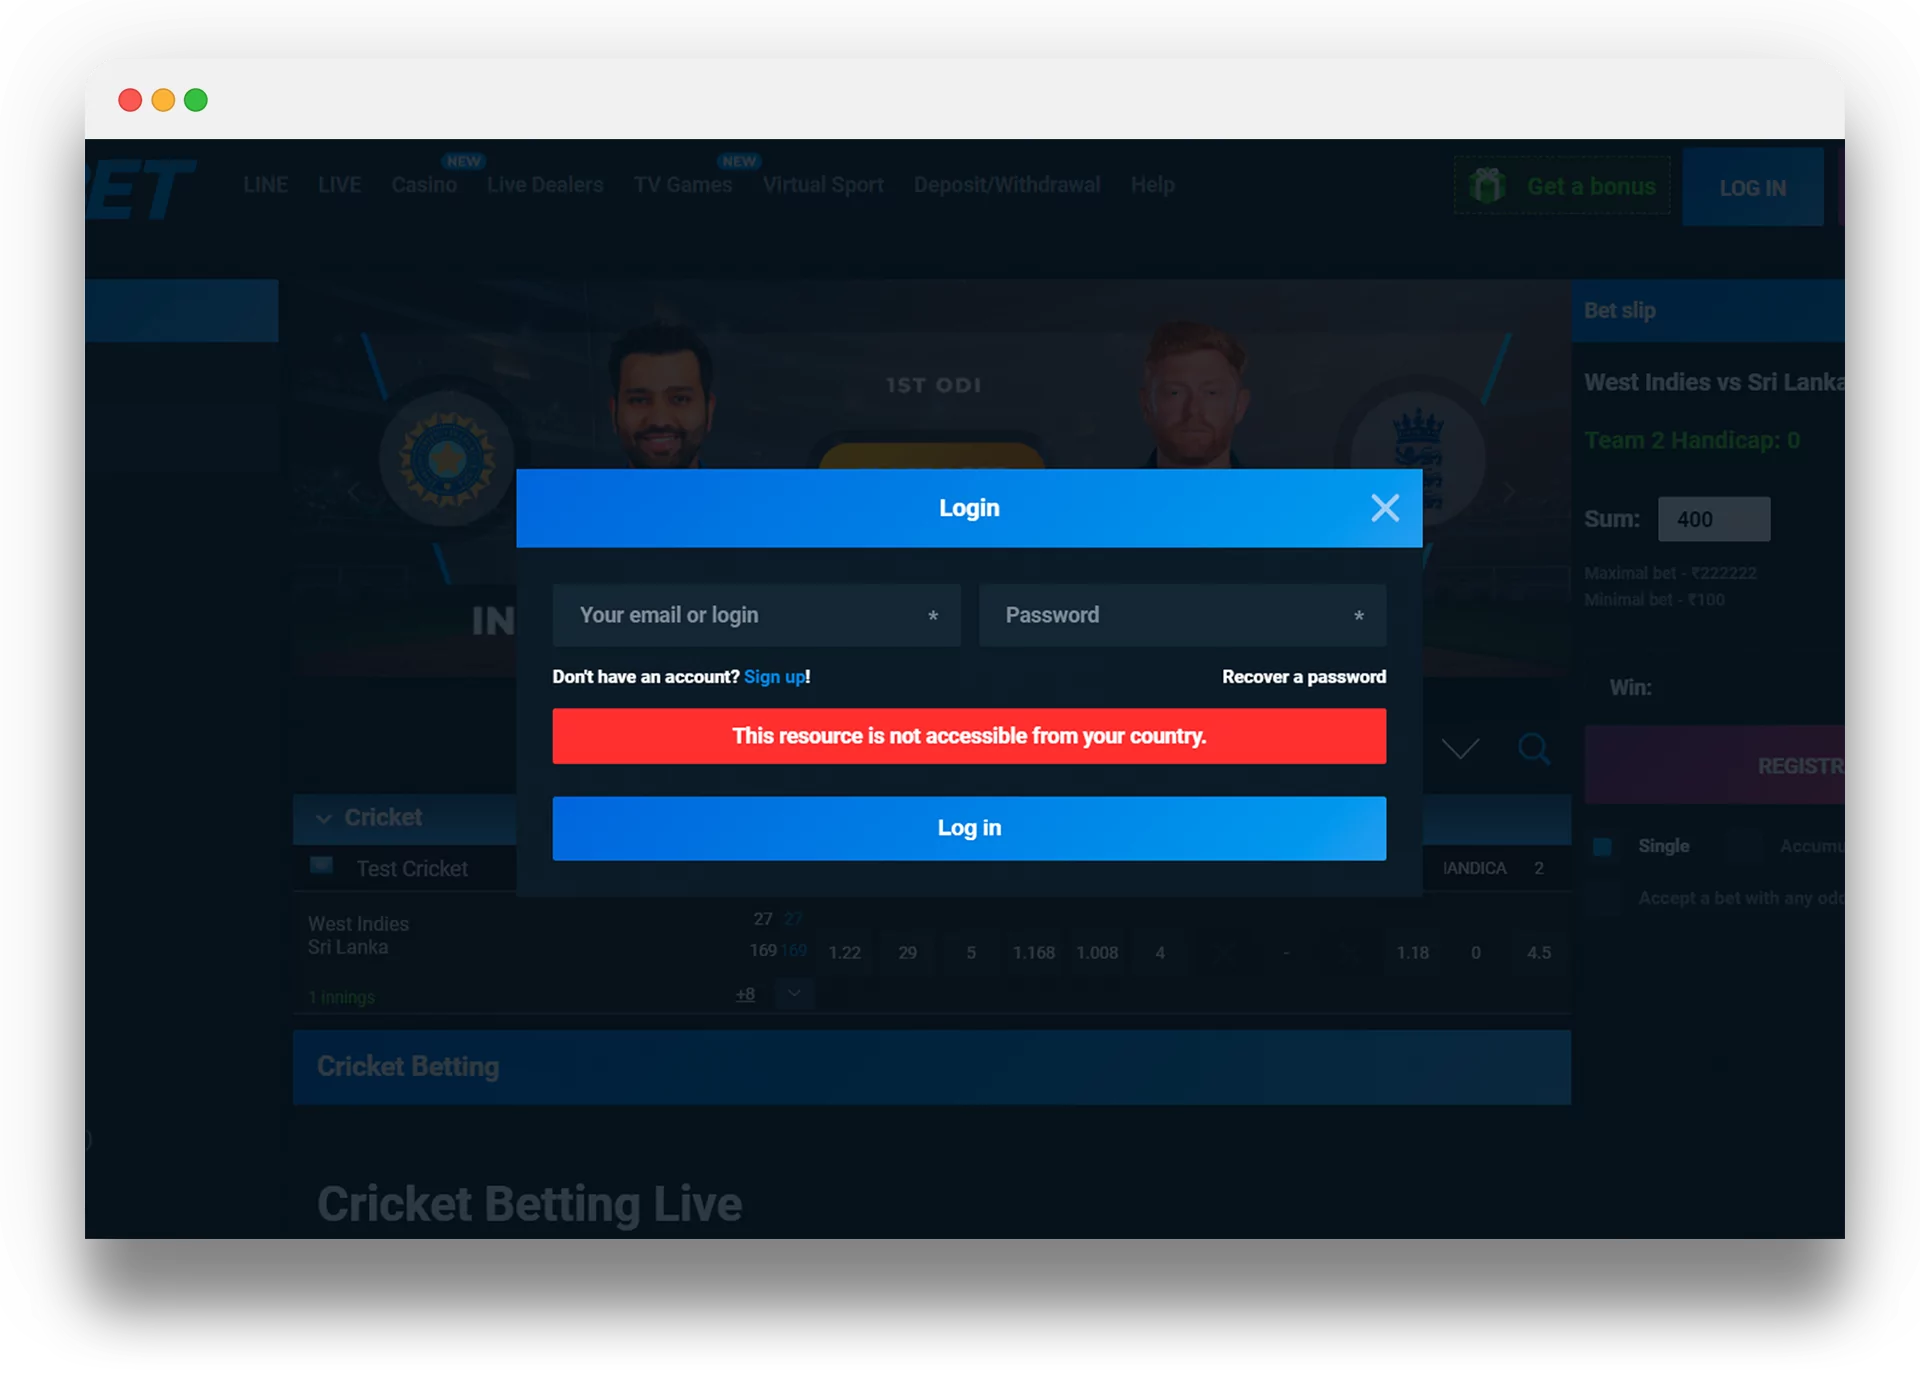 Now you can start betting via your PC or laptop.